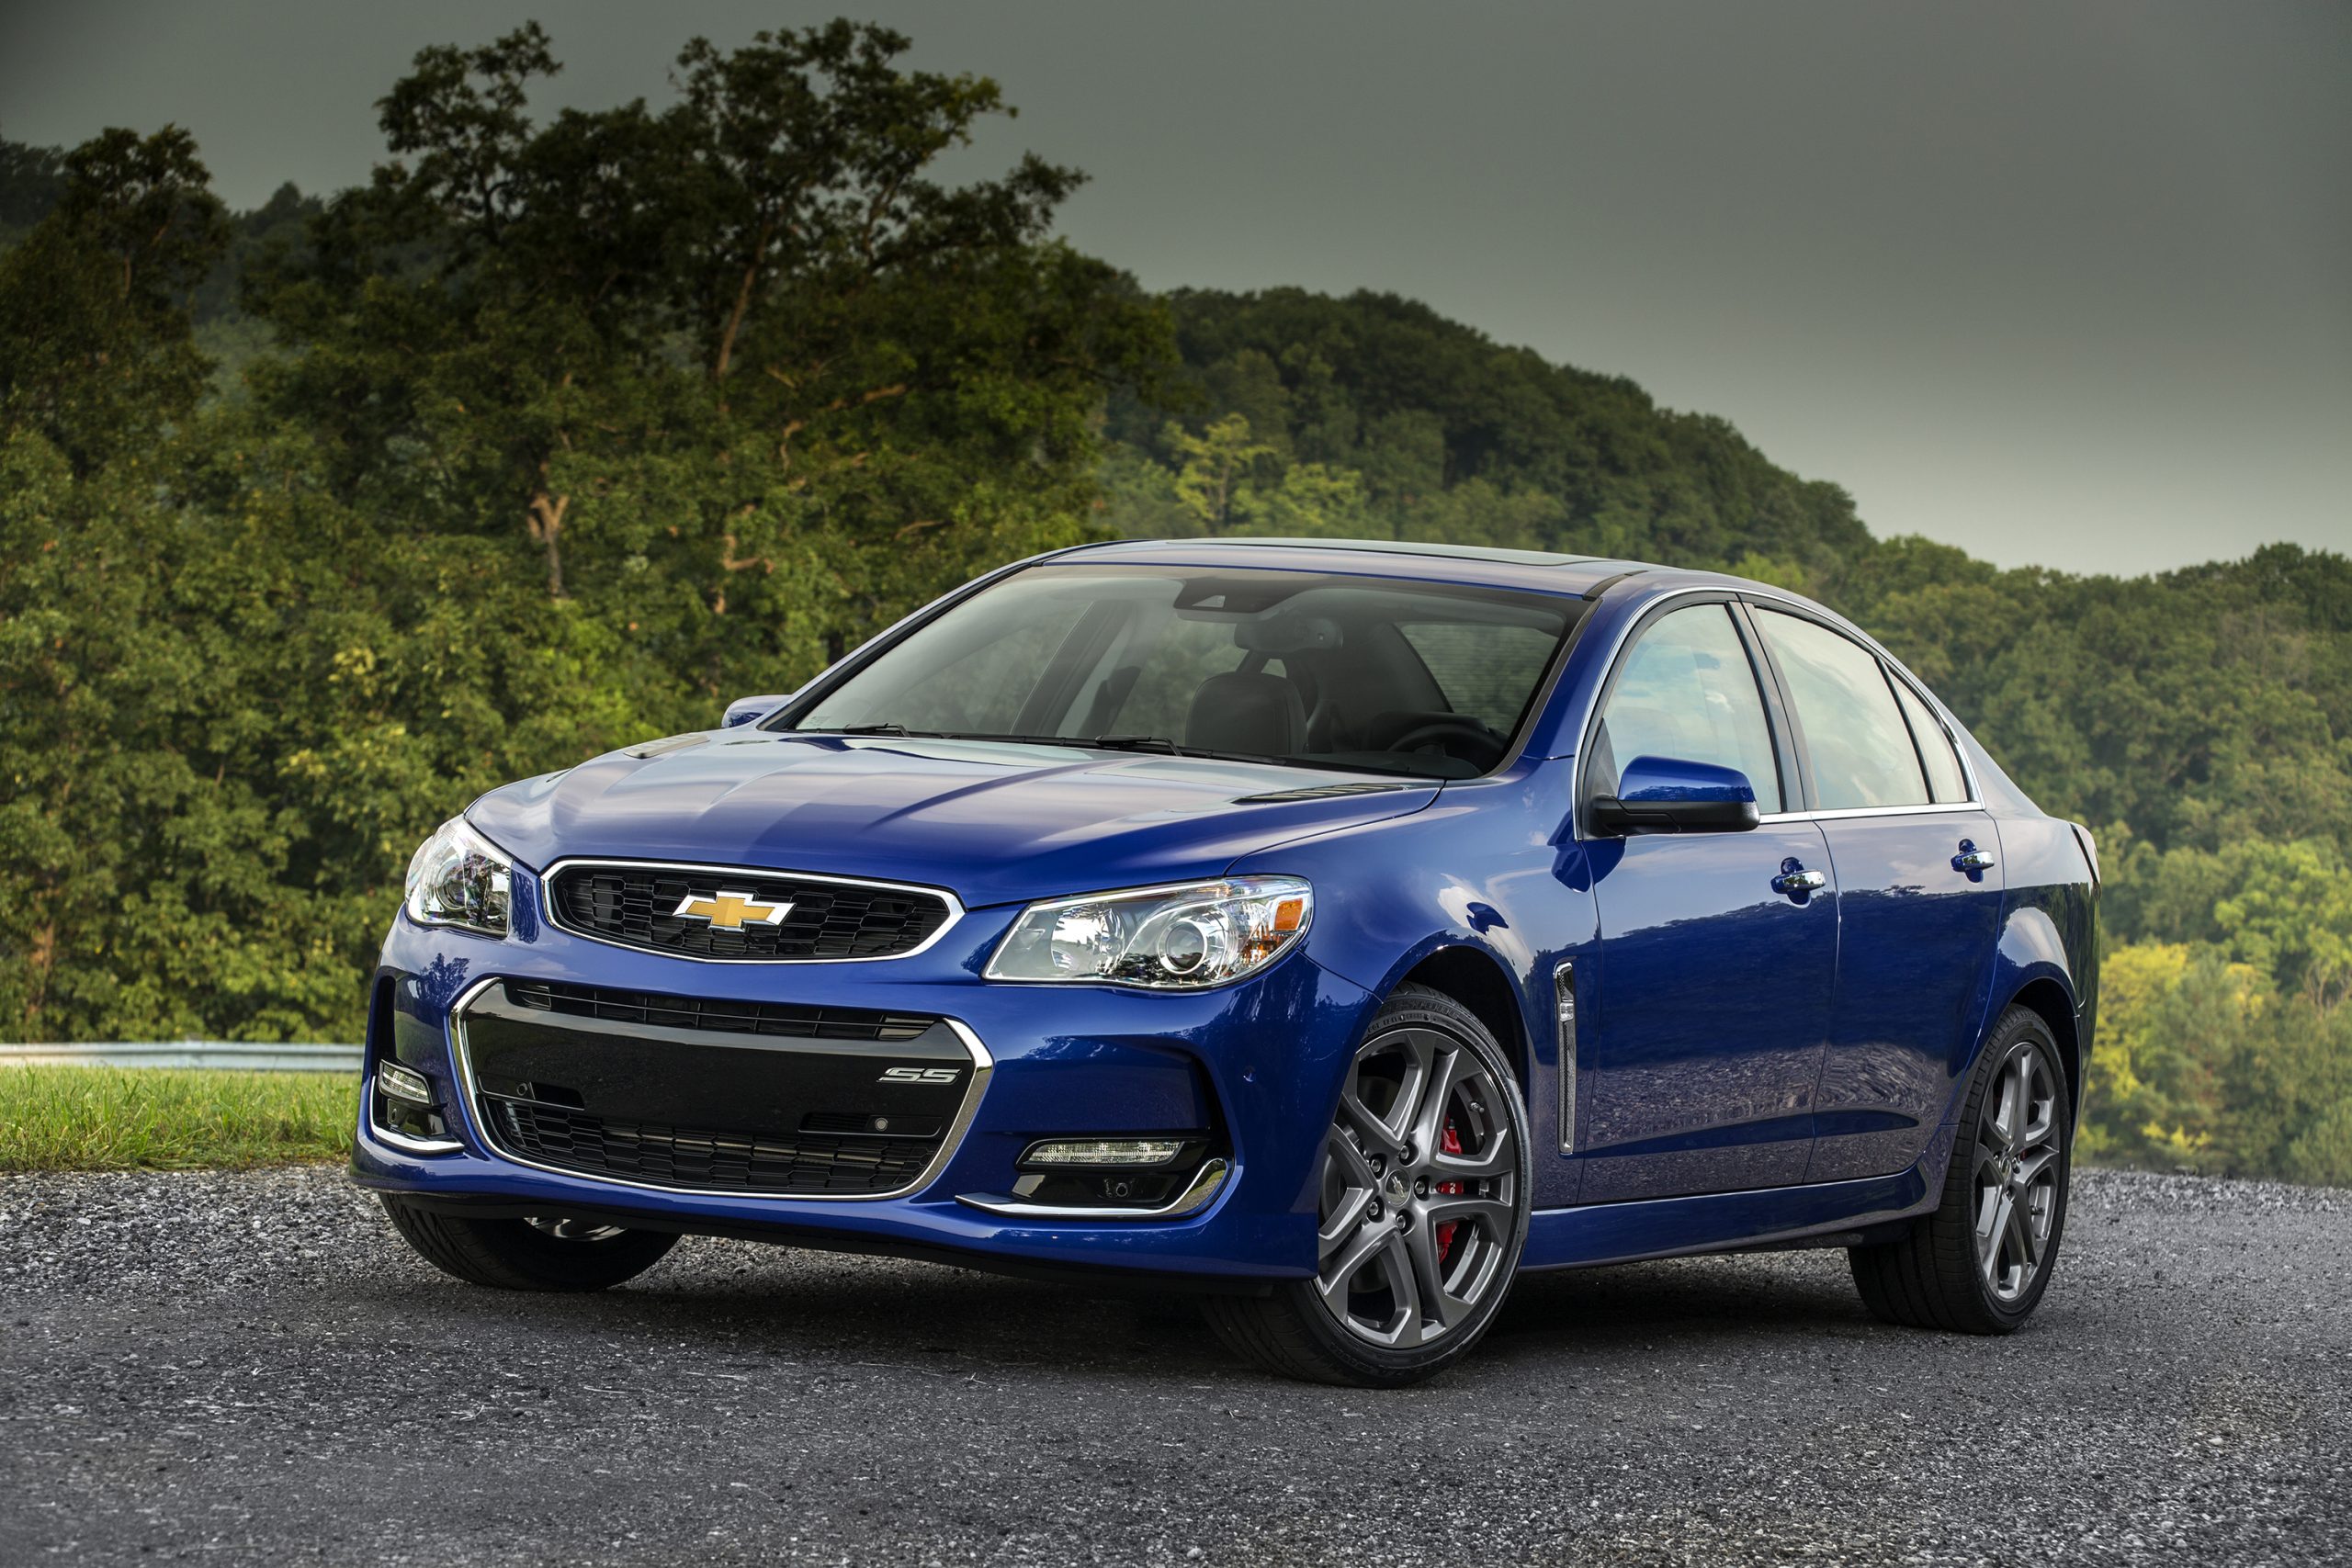 A Chevrolet SS, sold as the Holden Commodore in Australia, shot from the front 3/4 angle in blue.